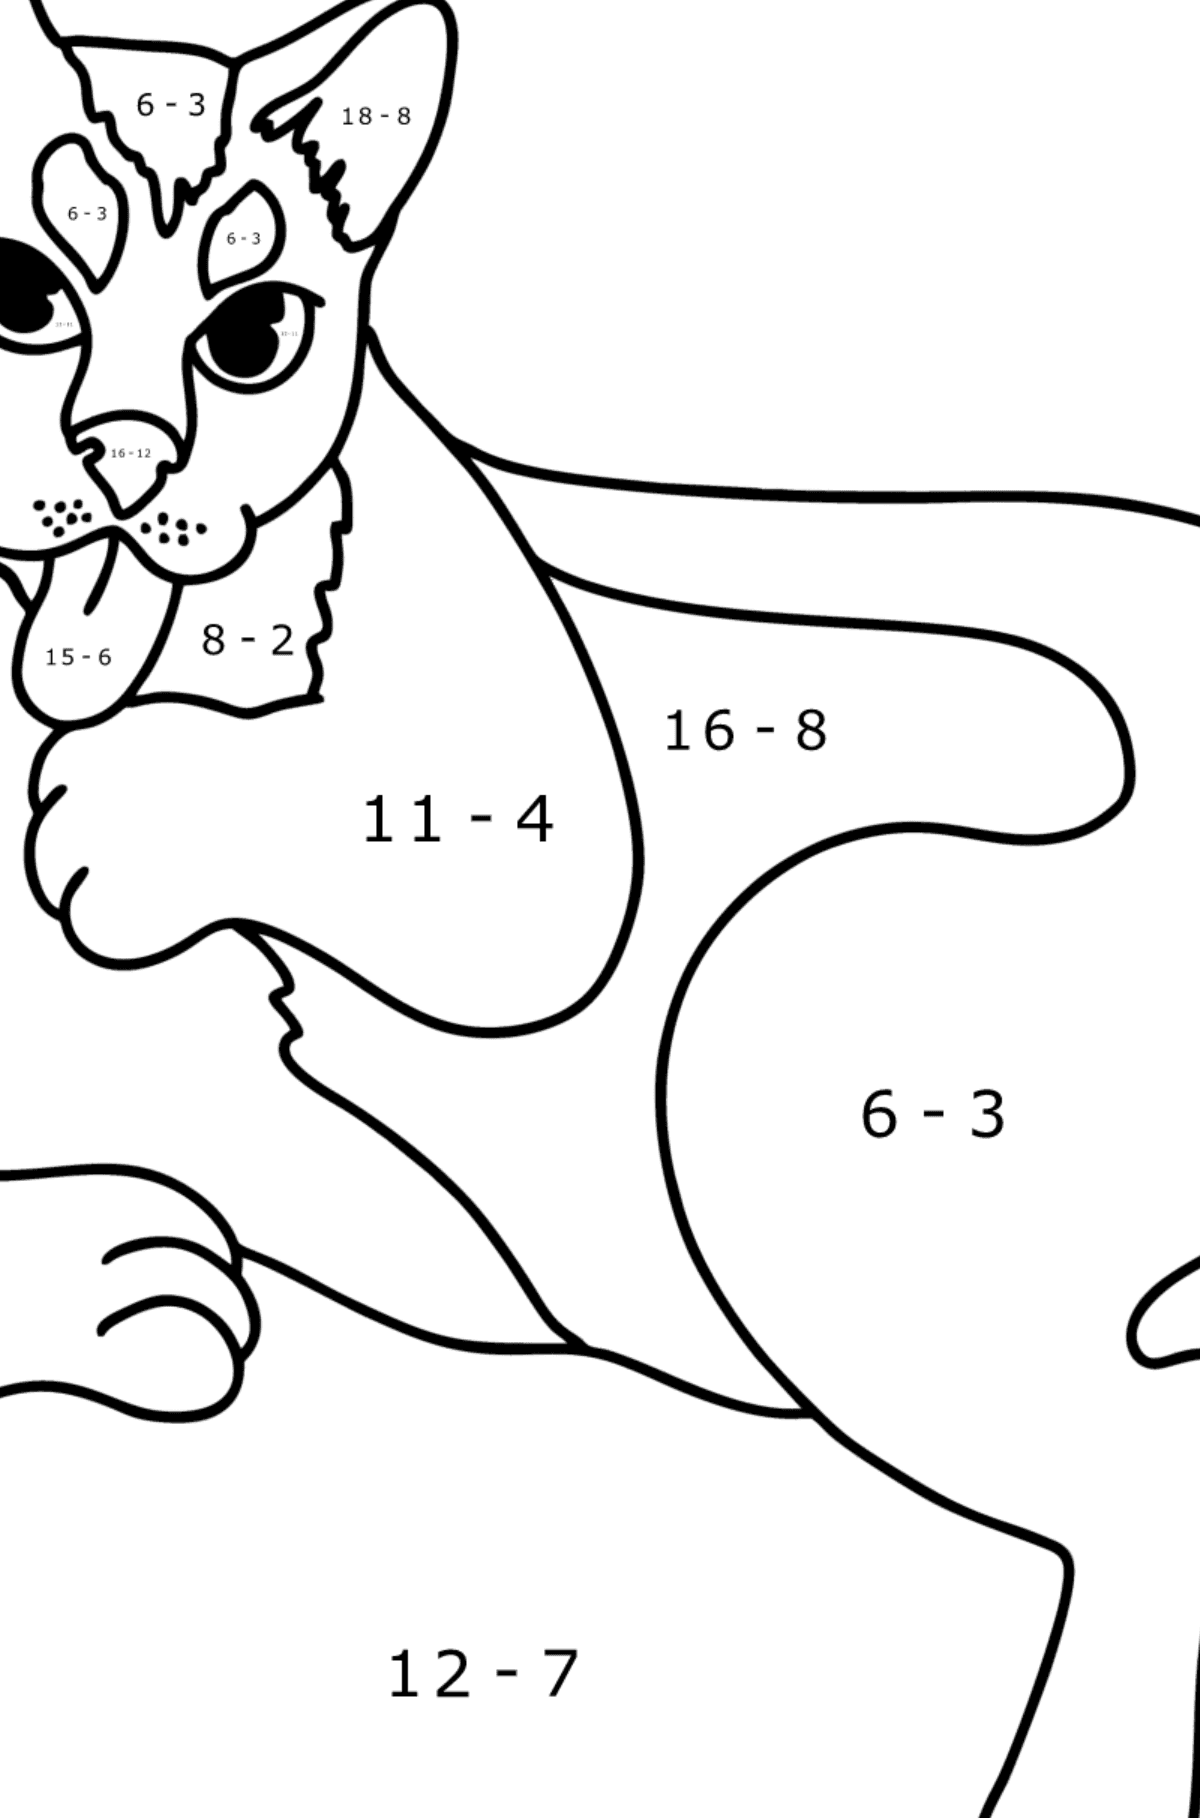 Black Cat coloring page - Math Coloring - Subtraction for Kids